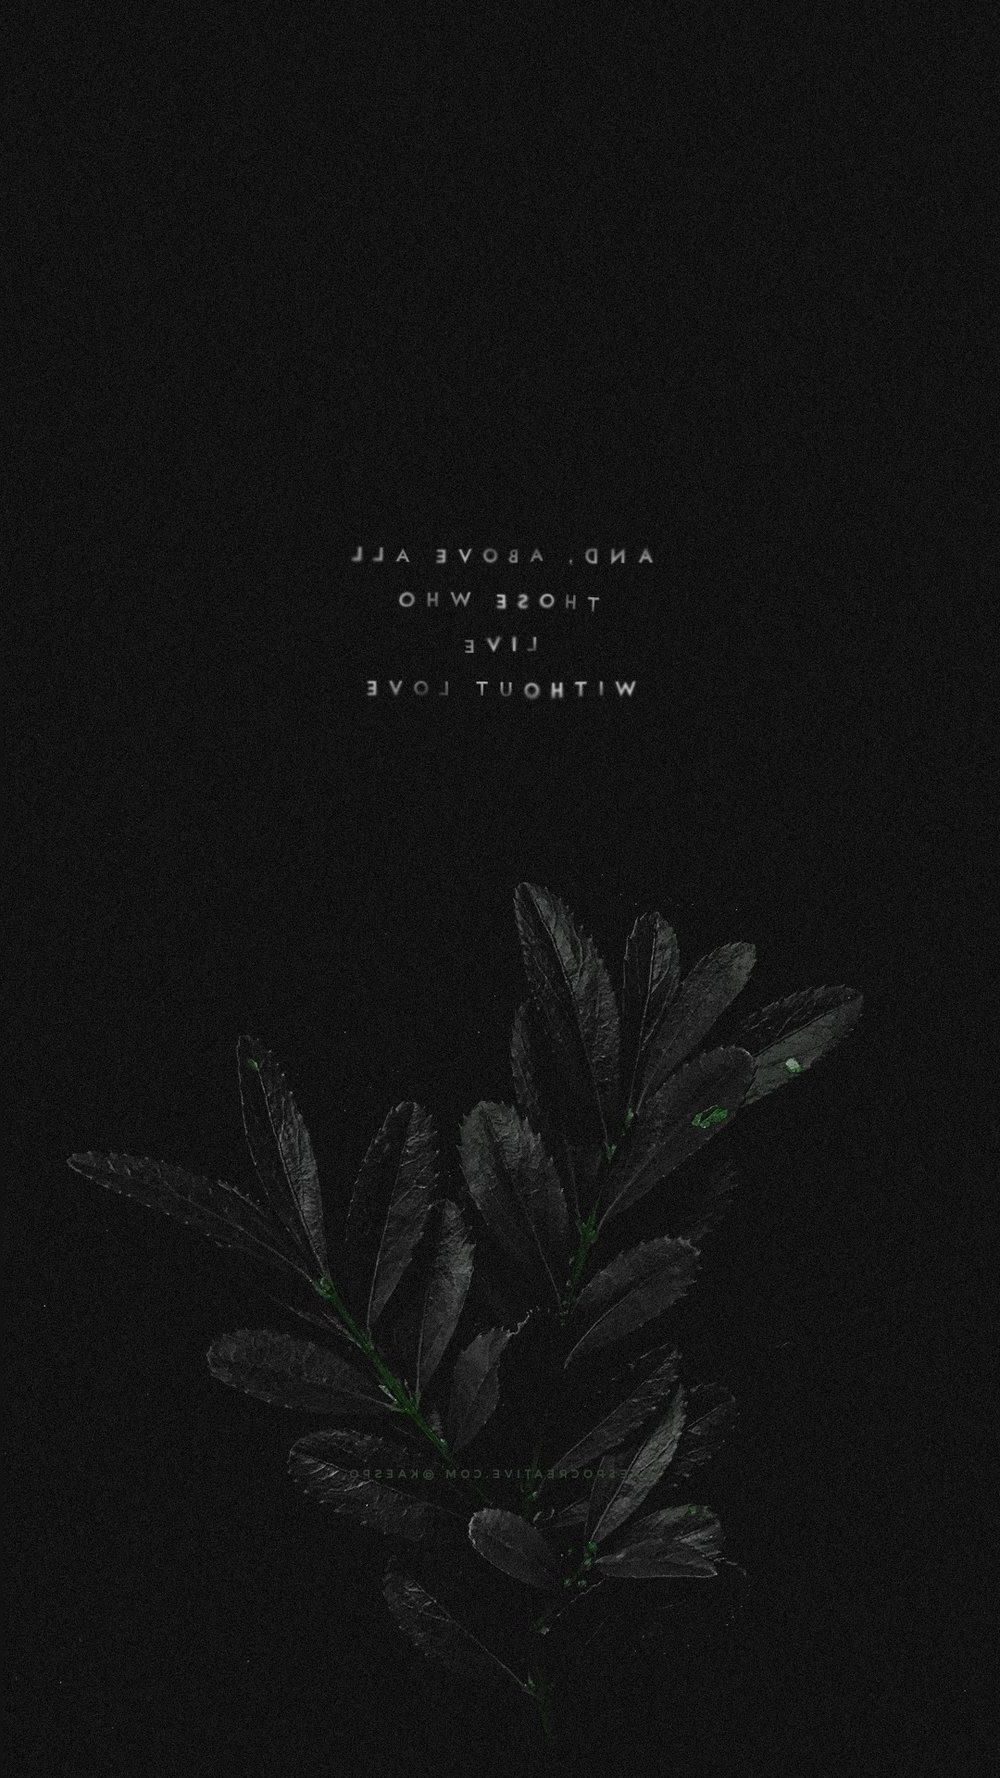 Aesthetic wallpaper phone background with a black background and a plant - Black